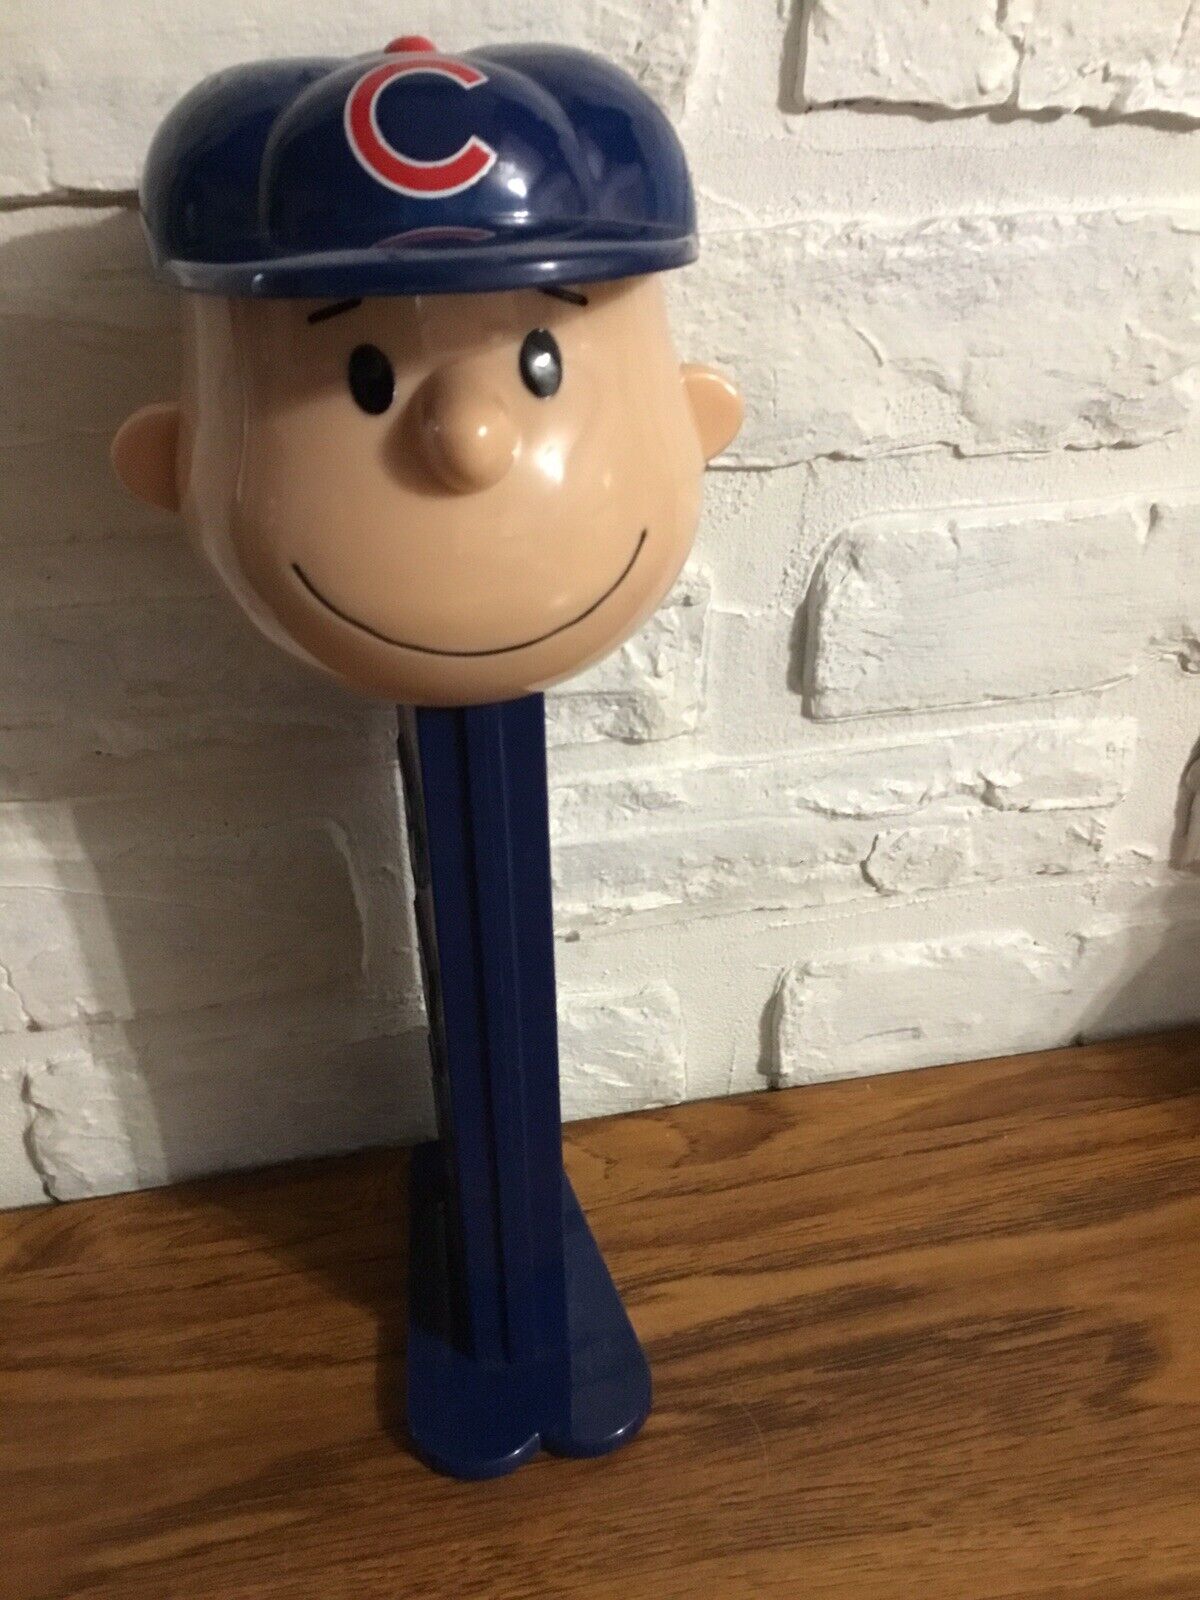 Chicago Cubs Charlie Brown Large 11-1/2” Per Dispenser Plays “take Me Out”